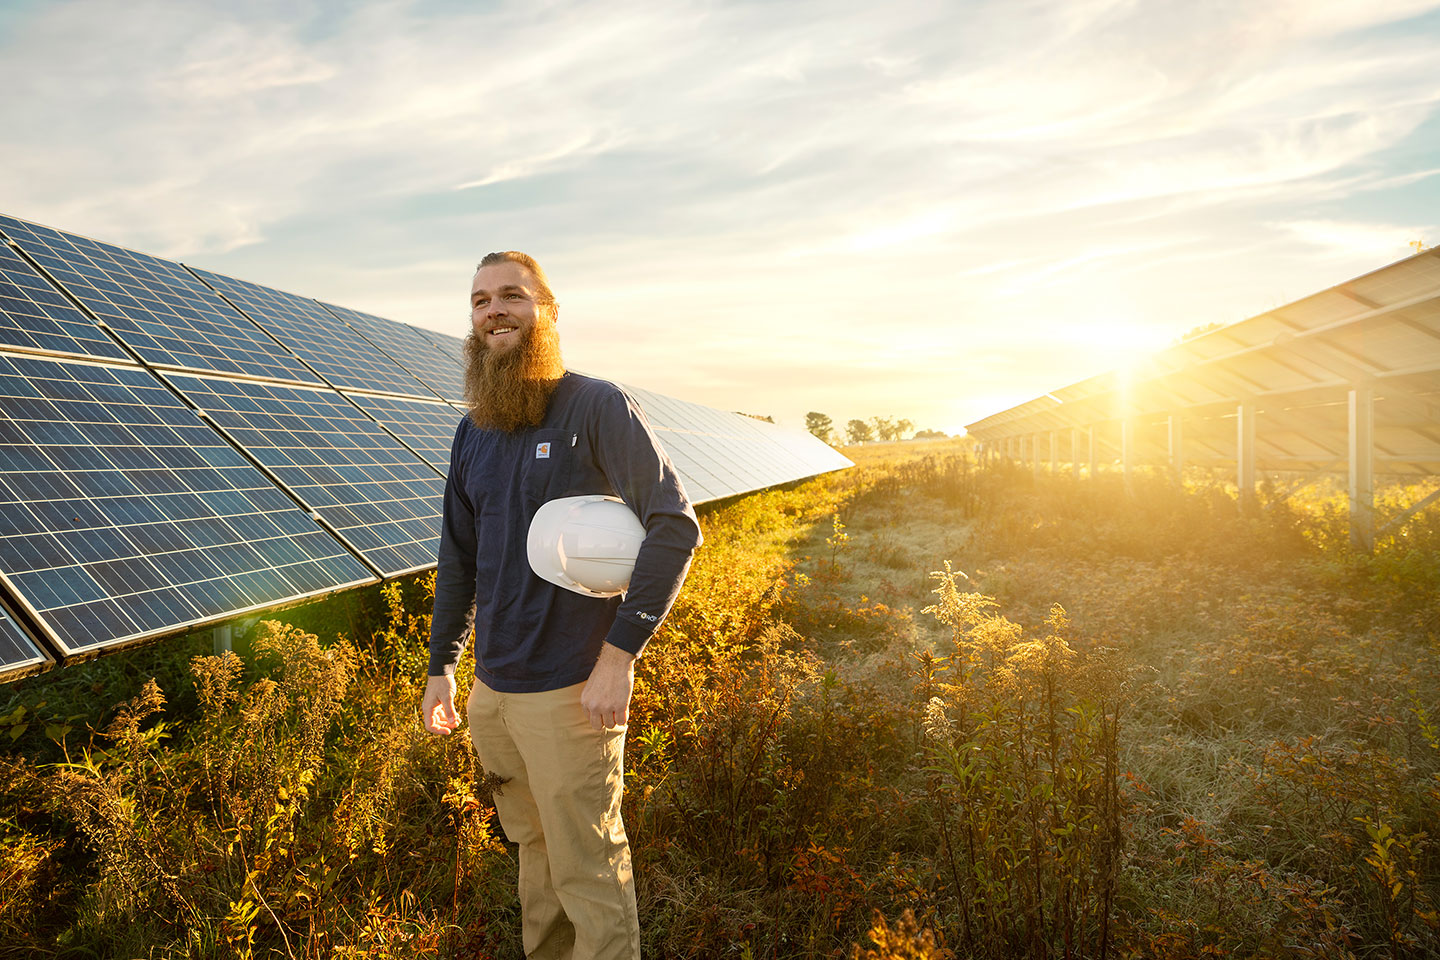 New England environmental portrait of a solar field worker professional outdoor shoot